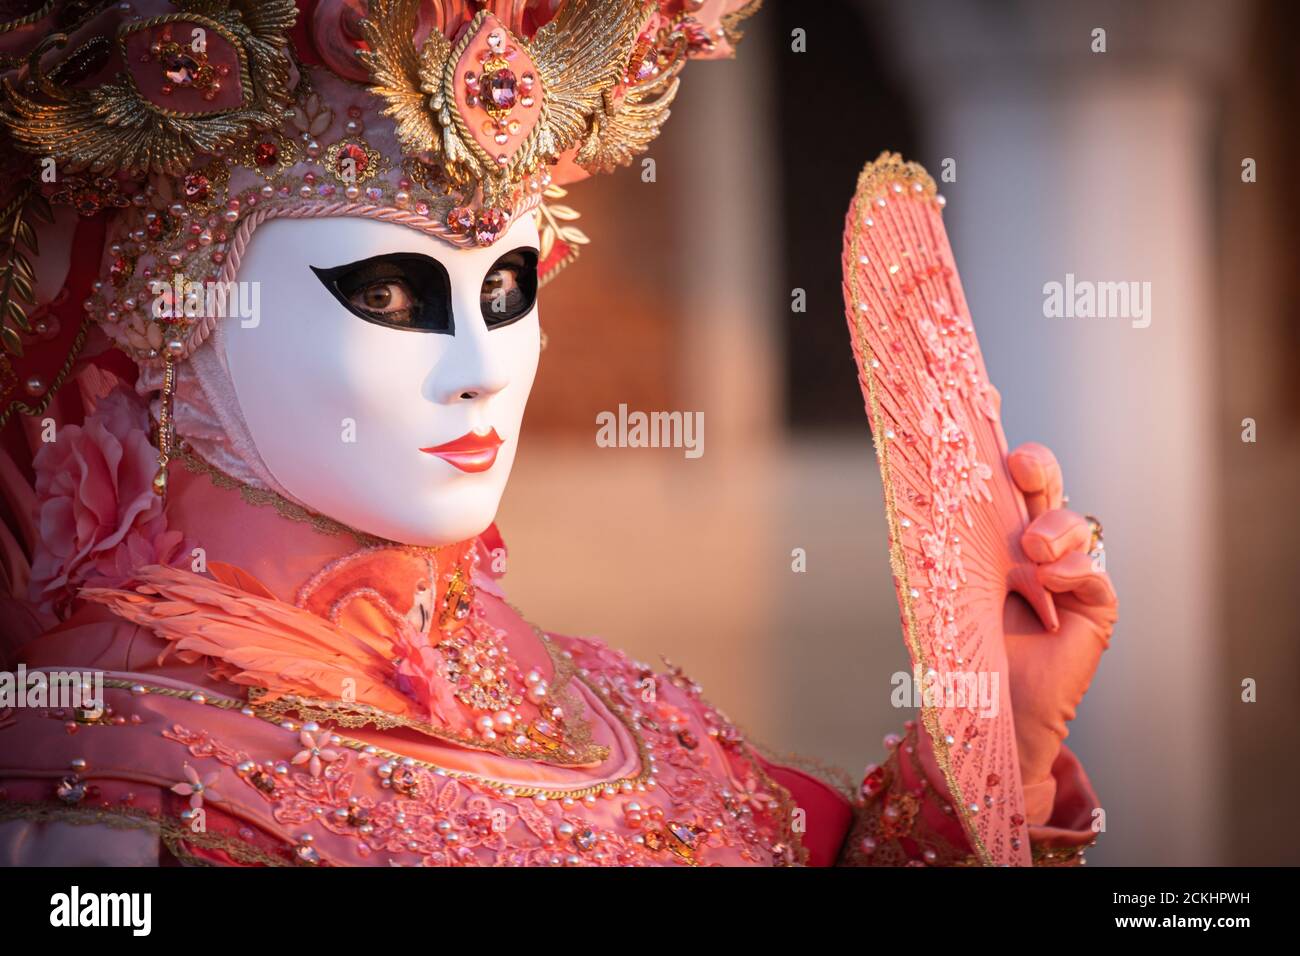 Traditional carneval costume/mask posing early morning at the waterfront during a sunrise at the annual carnival in Venice, Italy Stock Photo